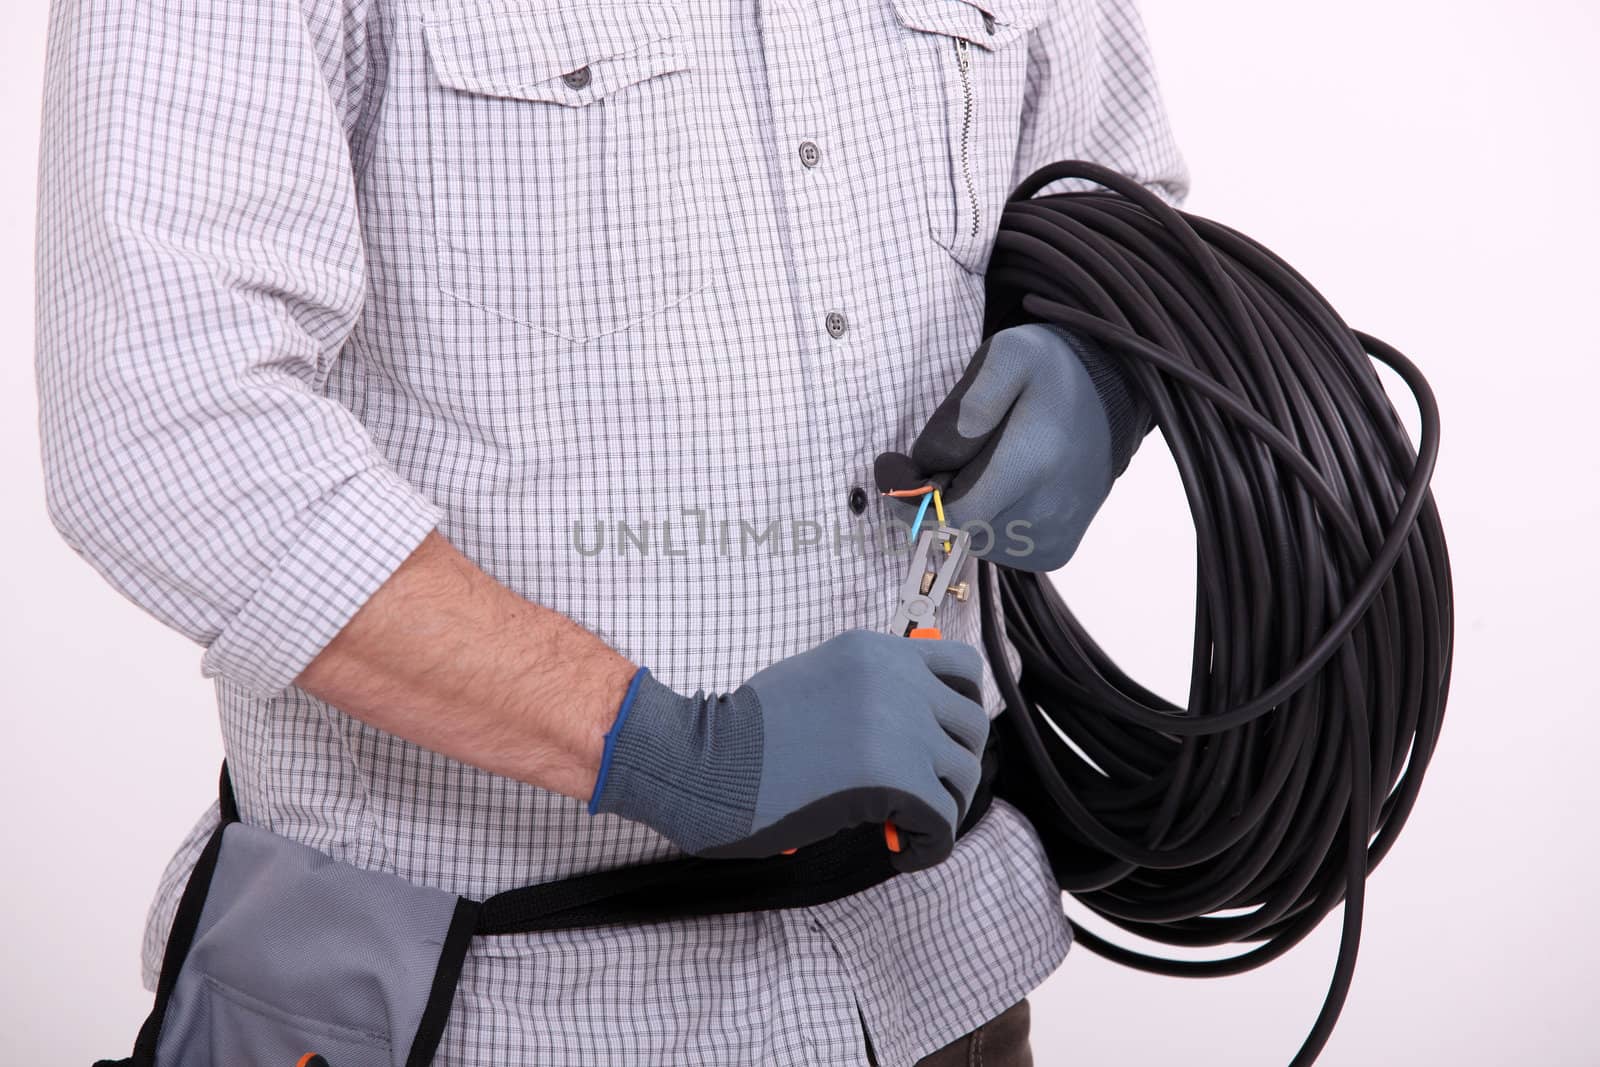 Cutting electrical wire by phovoir